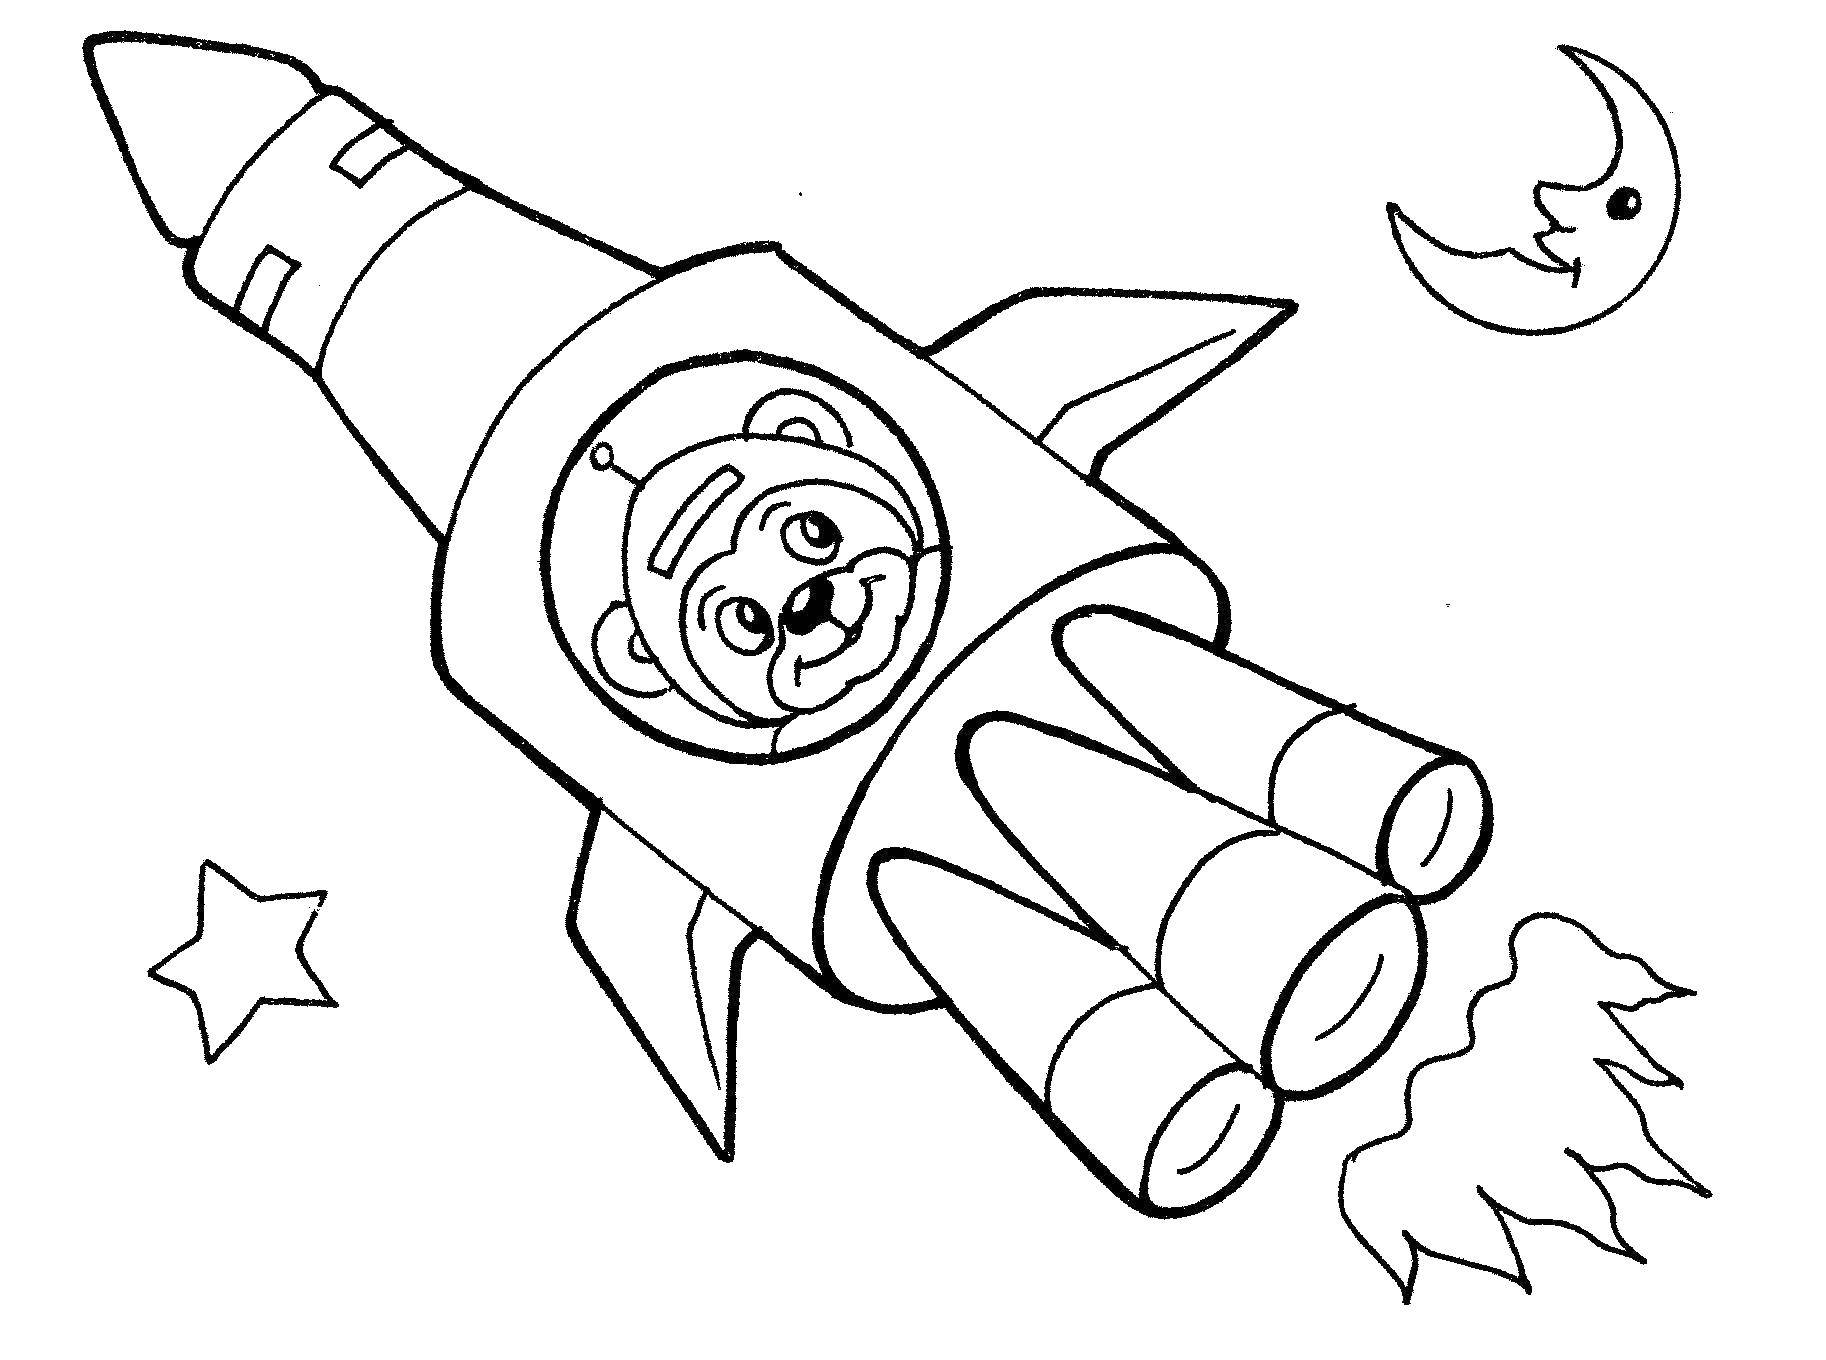 Coloring Bear in the rocket. Category rocket. Tags:  rocket, space.